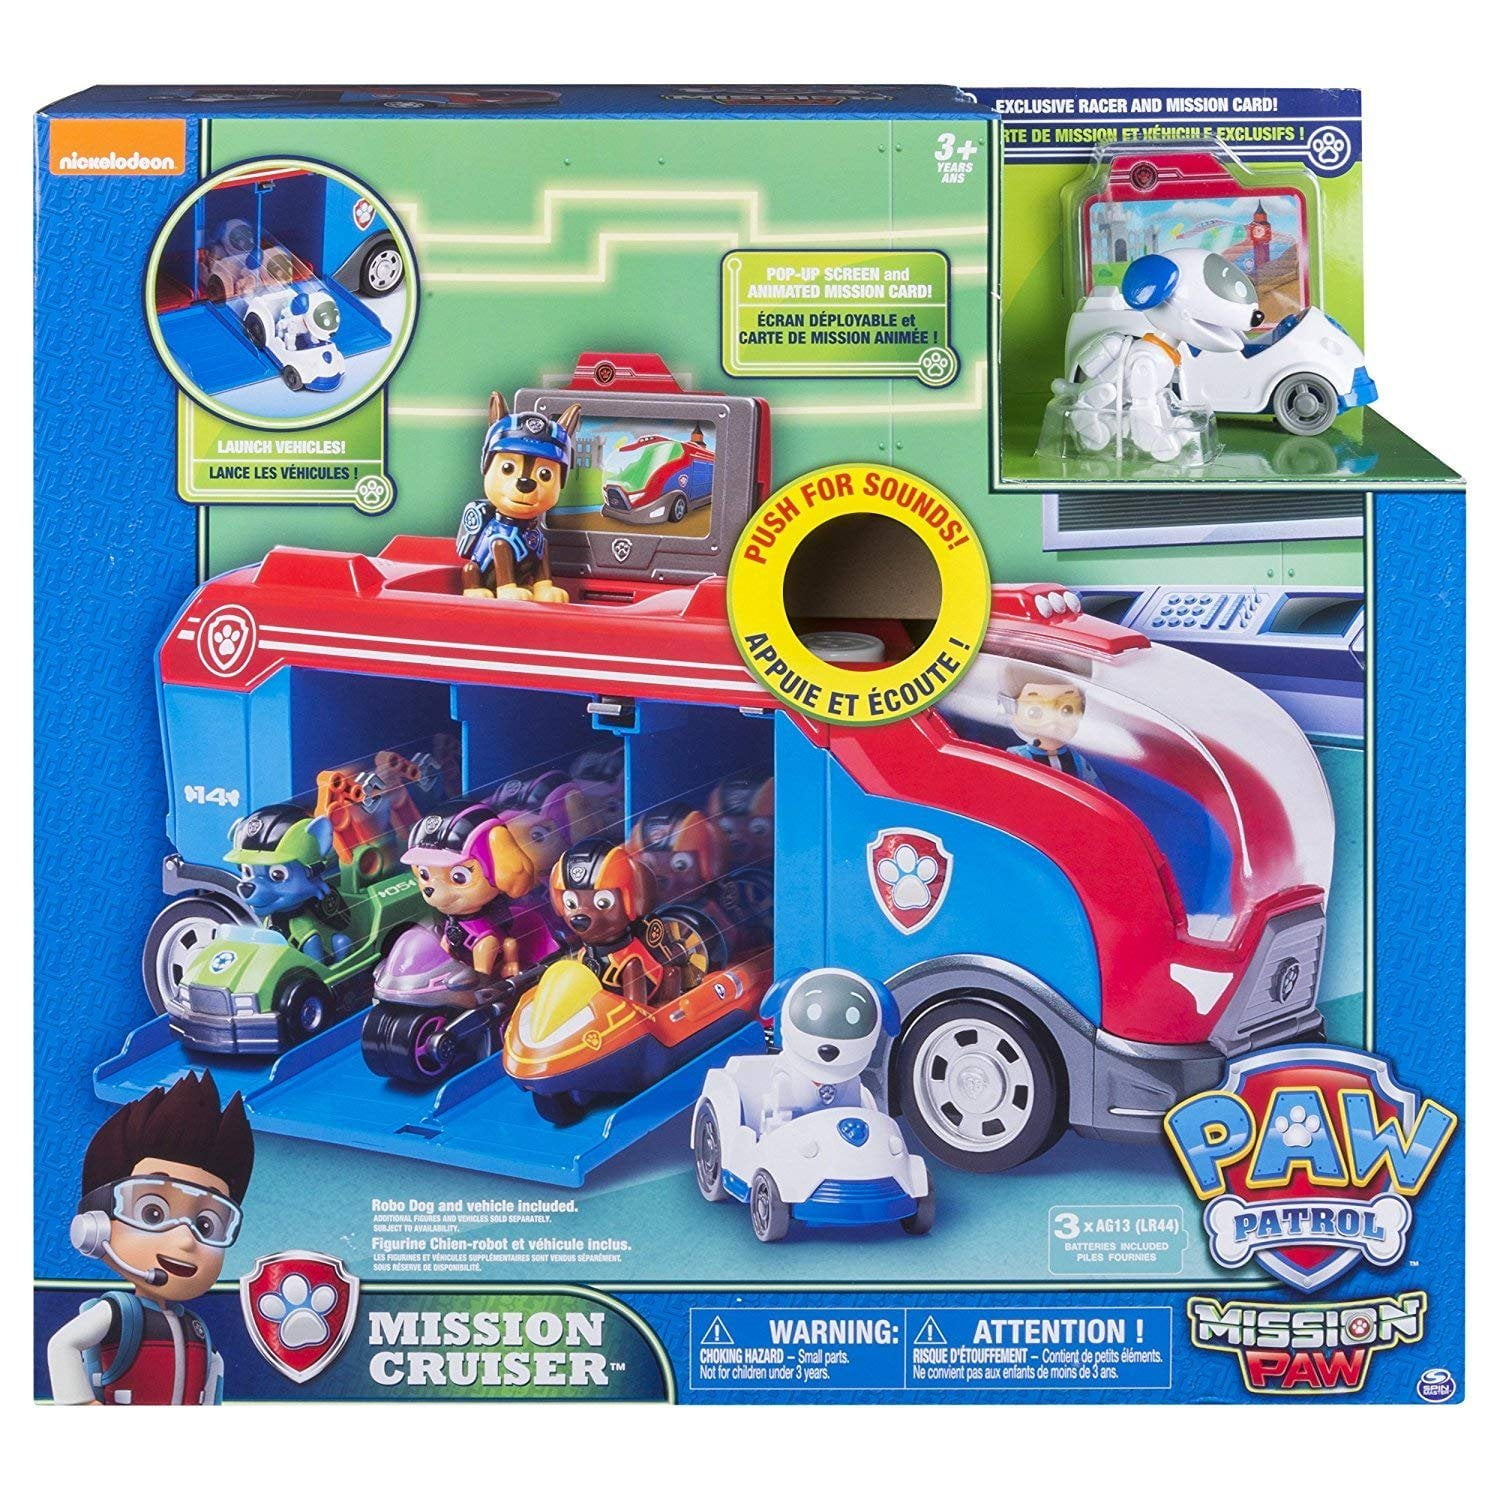 Paw Patrol Mission Cruiser Mission Cruiser is 3+ and requires 3 AG13 batteries included - Walmart.com